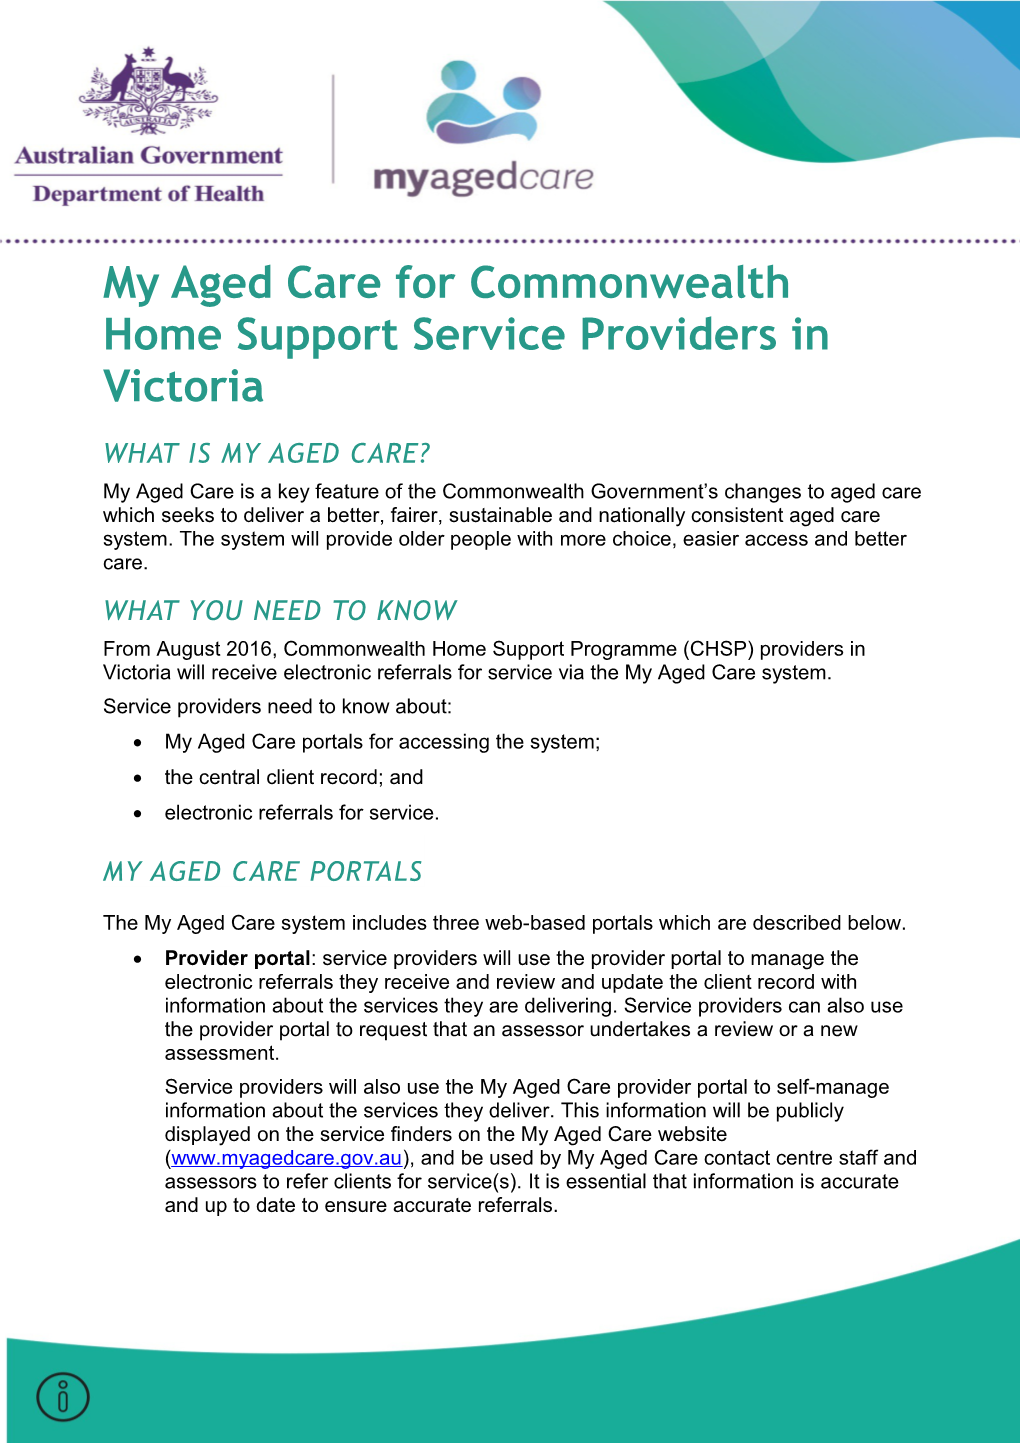 My Aged Care for Commonwealth Home Support Service Providersin Victoria